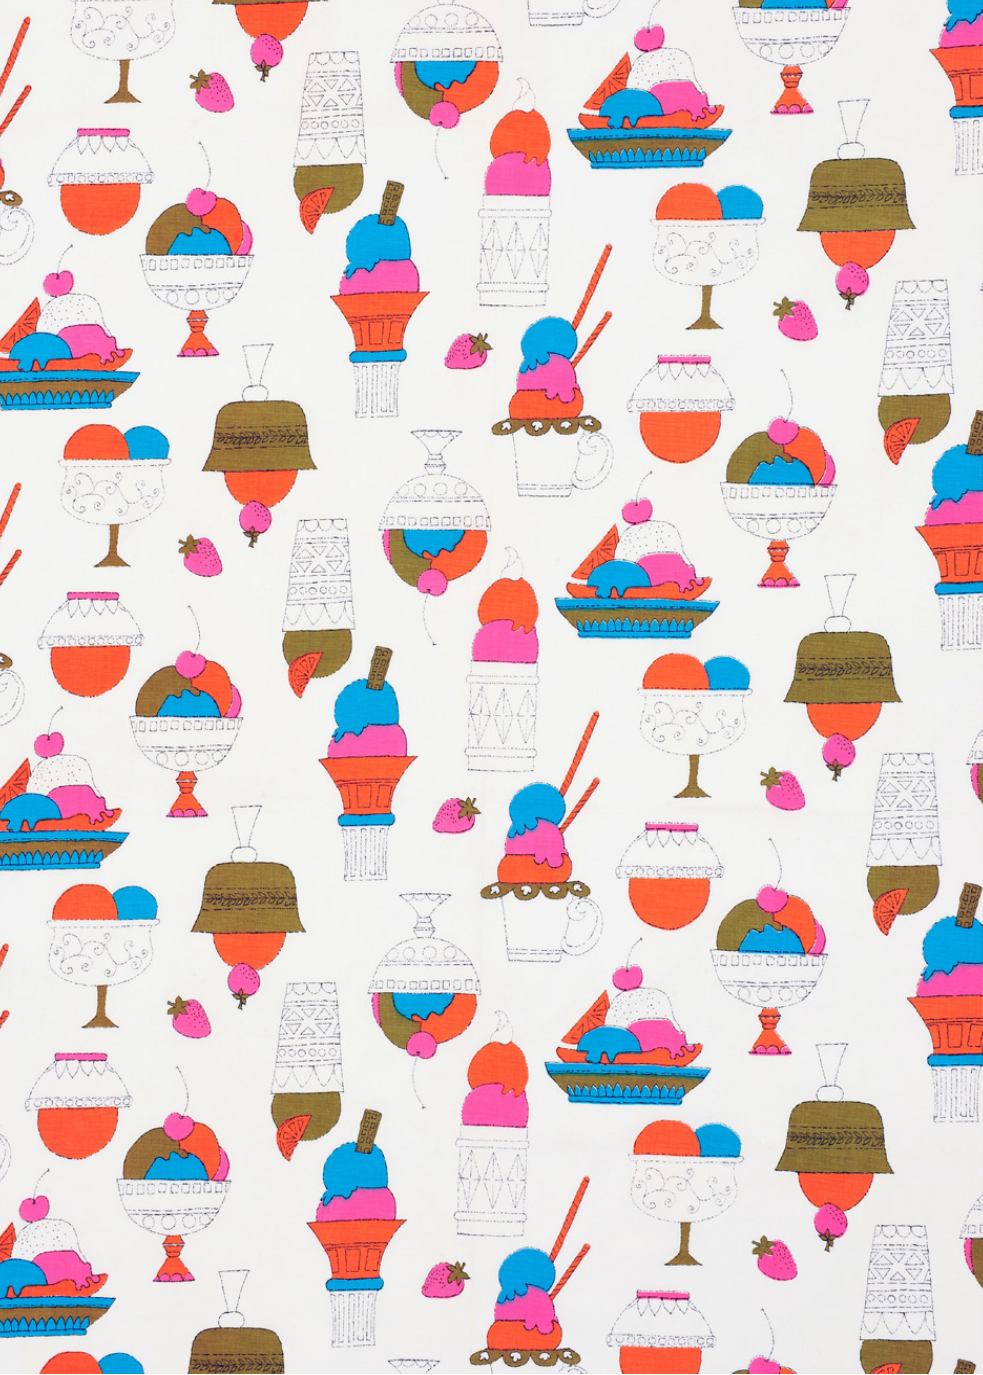 Ice-Cream-Desserts-©-2022-The-Andy-Warhol-Foundation-for-the-Visual-Arts-Inc-Licensed-by-DACS-London-Warhol-The-Textiles-at-Dovecot-Studios-1bmbecrpv